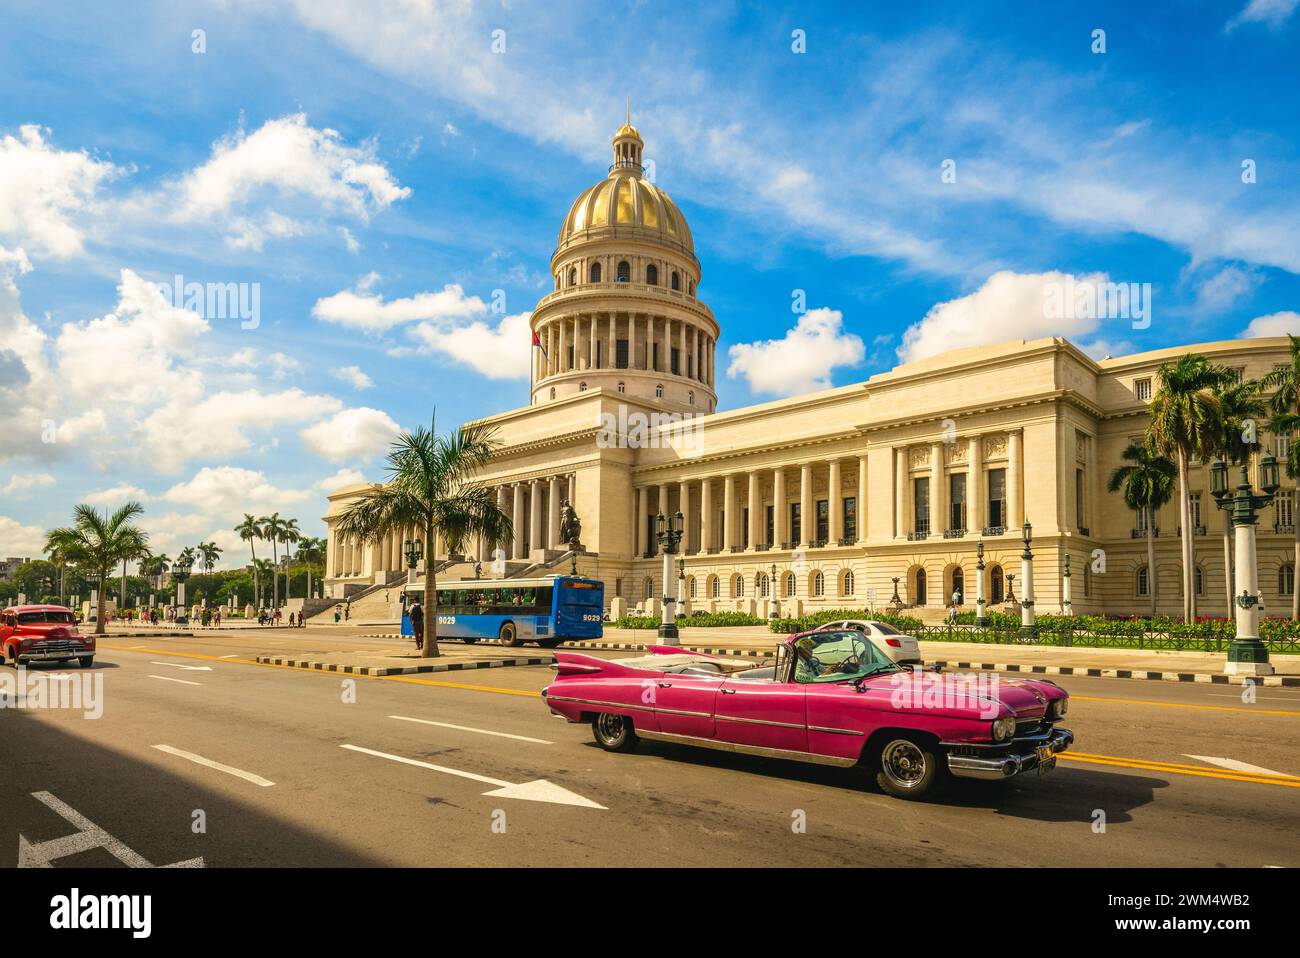 National Capitol Building and vintage car in havana, cuba Stock Photo